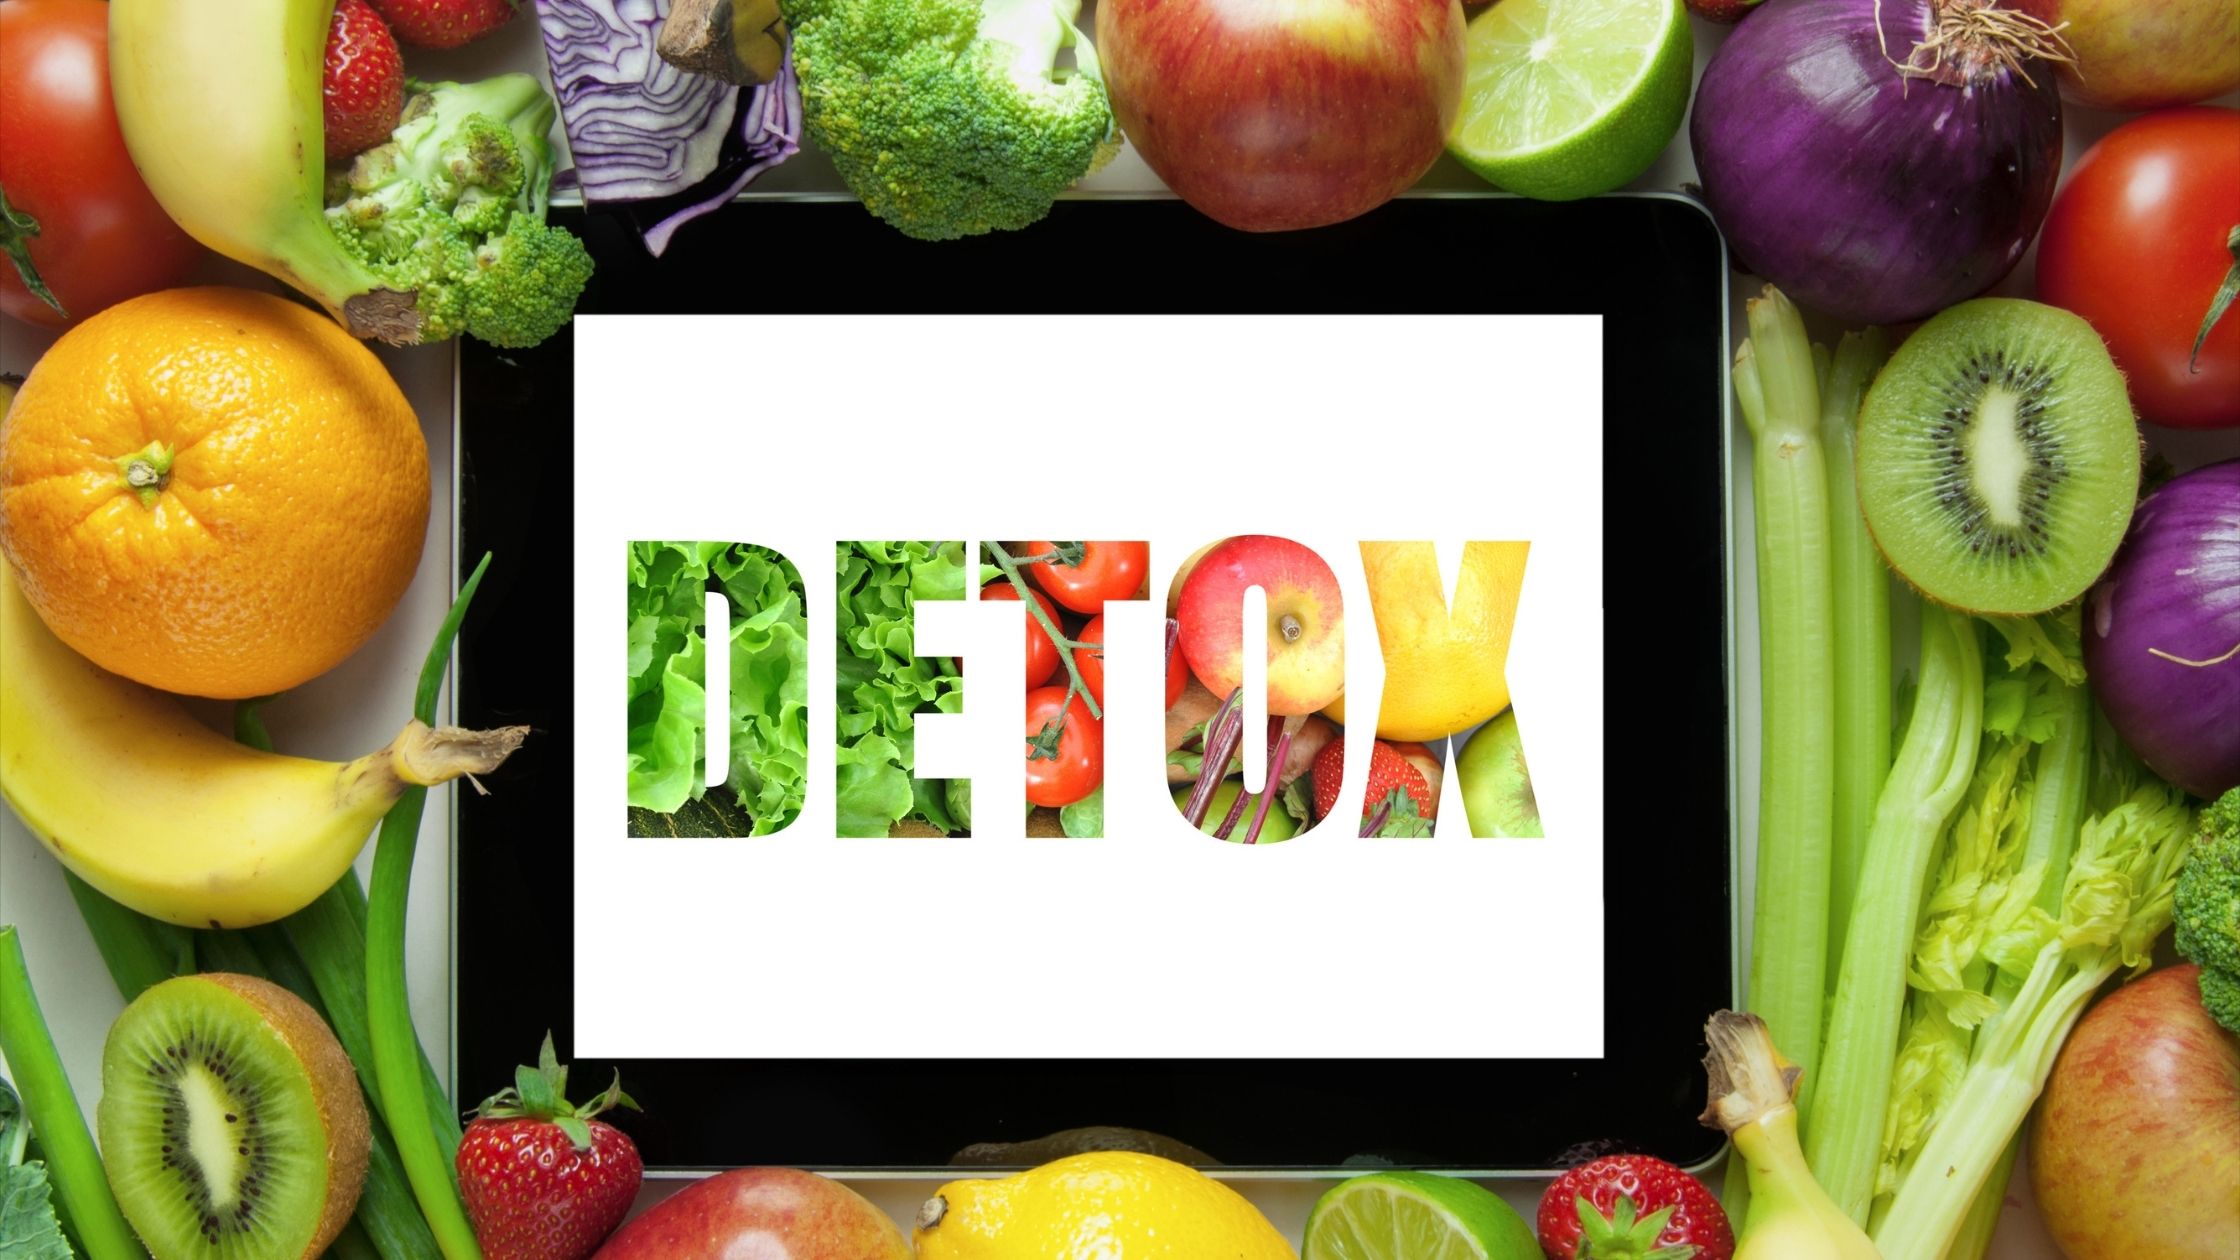 Detox Diets: Do They Work And How?